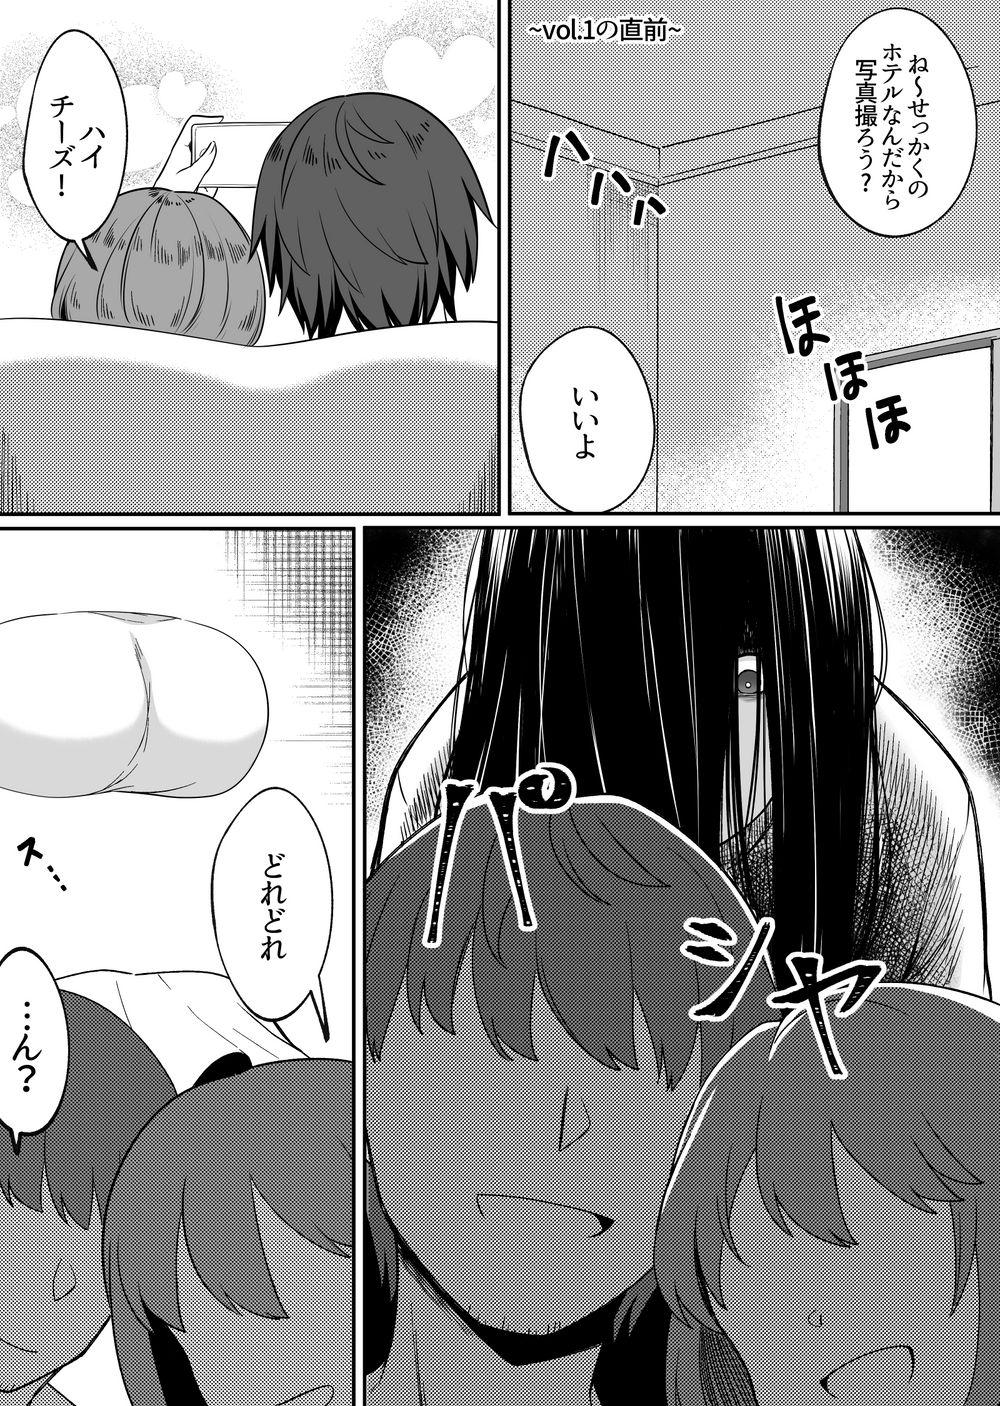 Licking INCOMPLETE [Xion] Mirror Collection 5 Teenie - Page 1